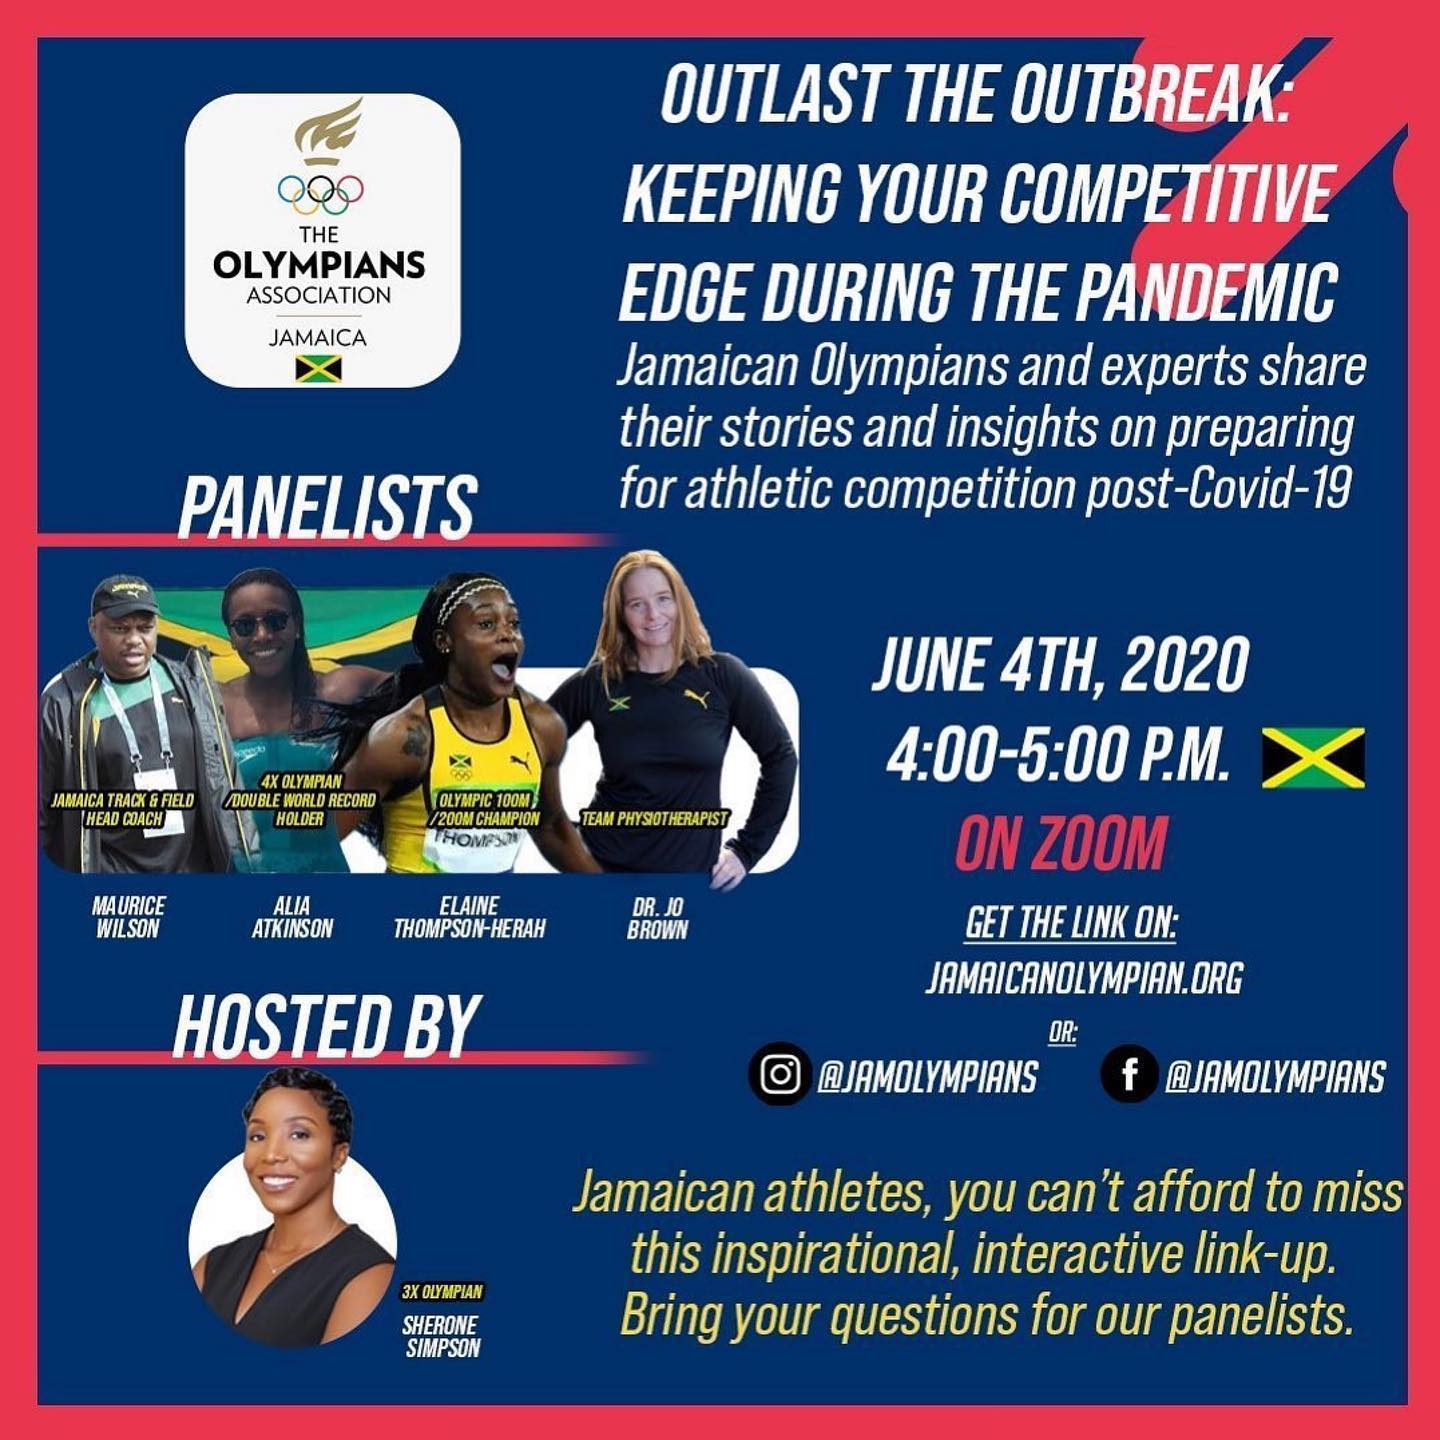 Sherone Simpson to host panel discussion with Elaine Thompson